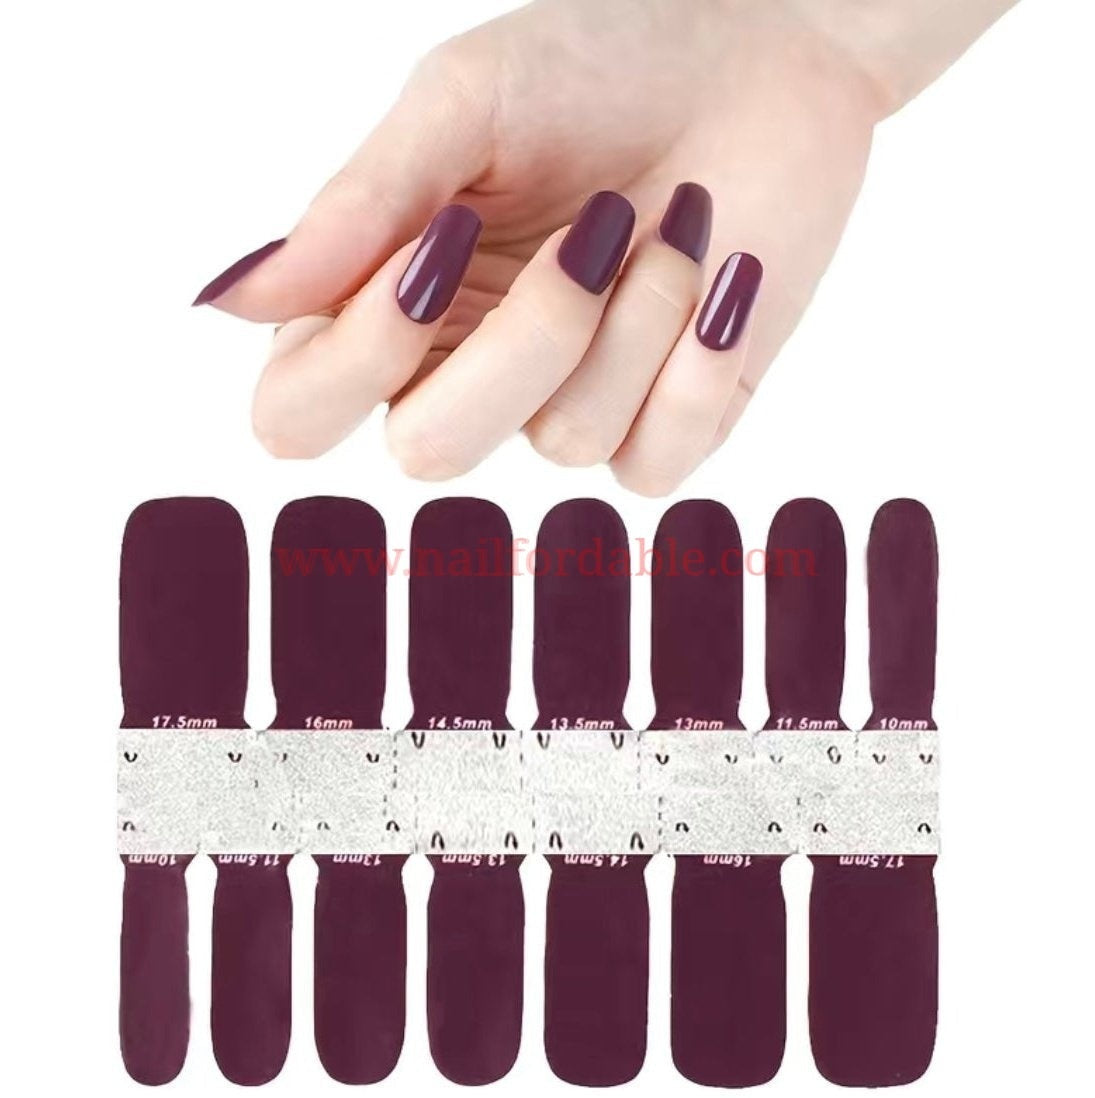 Can't Pick Just One Fall Neutral? The 'Box Of Chocolates' Nail Trend Is For  You